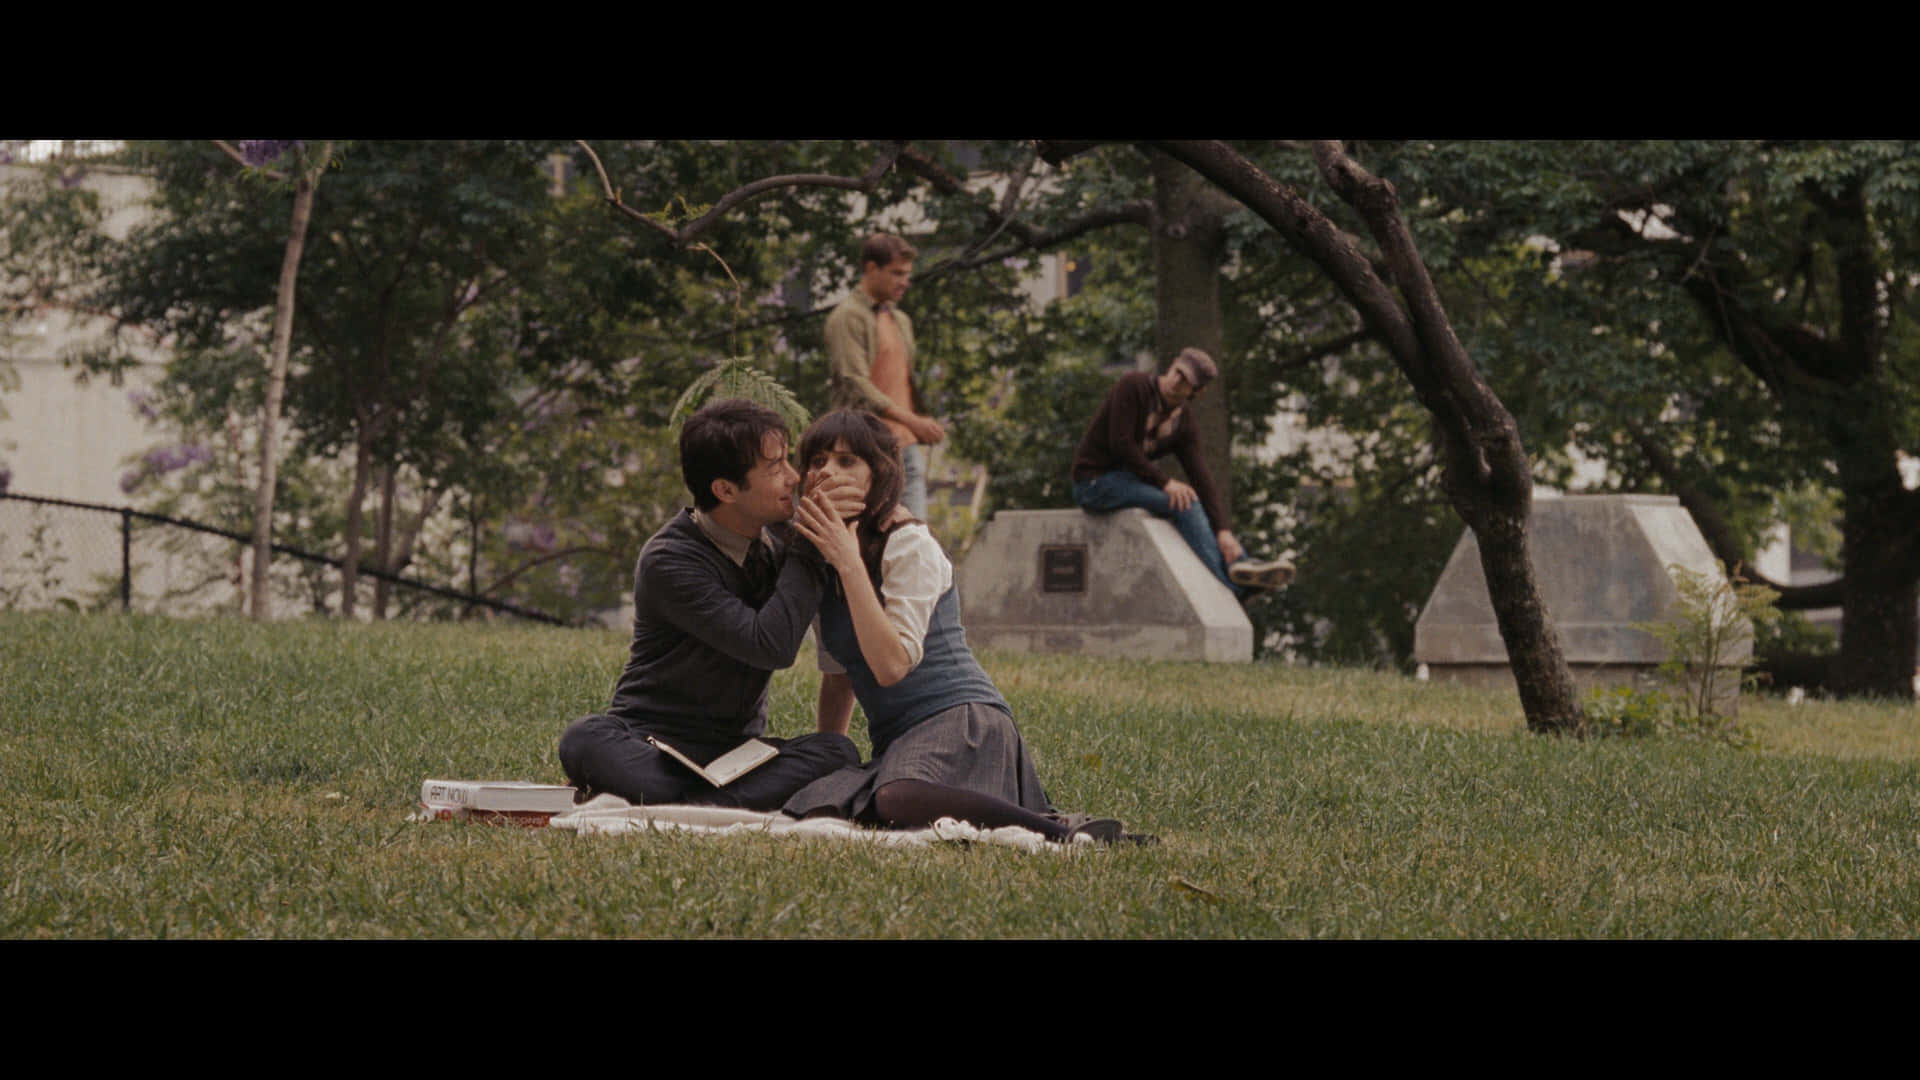 "500 Days Of Summer - Find out what happens when two complete opposites, who couldn't be more different, cross paths"